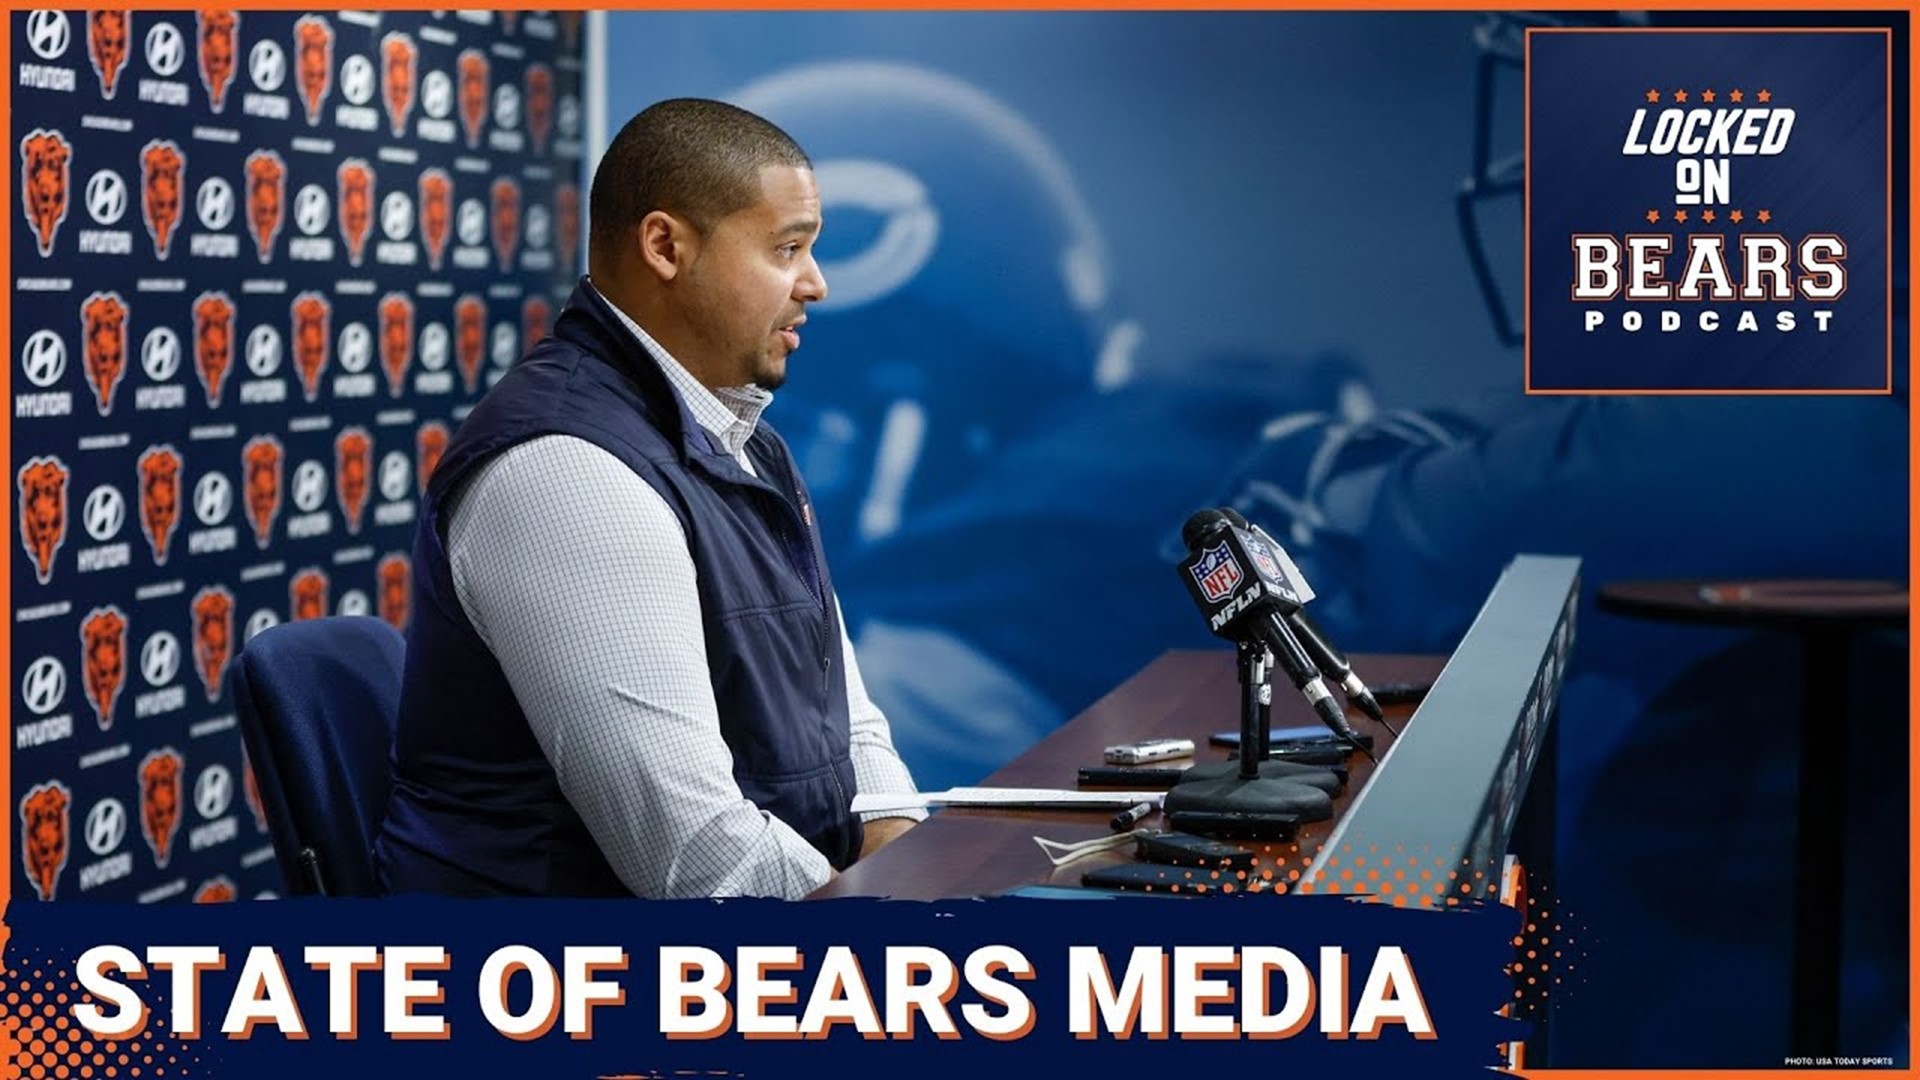 Chicago Bears fans have been critical of some media members for being too negative about the Bears, while others are criticized as being homers who are too positive.